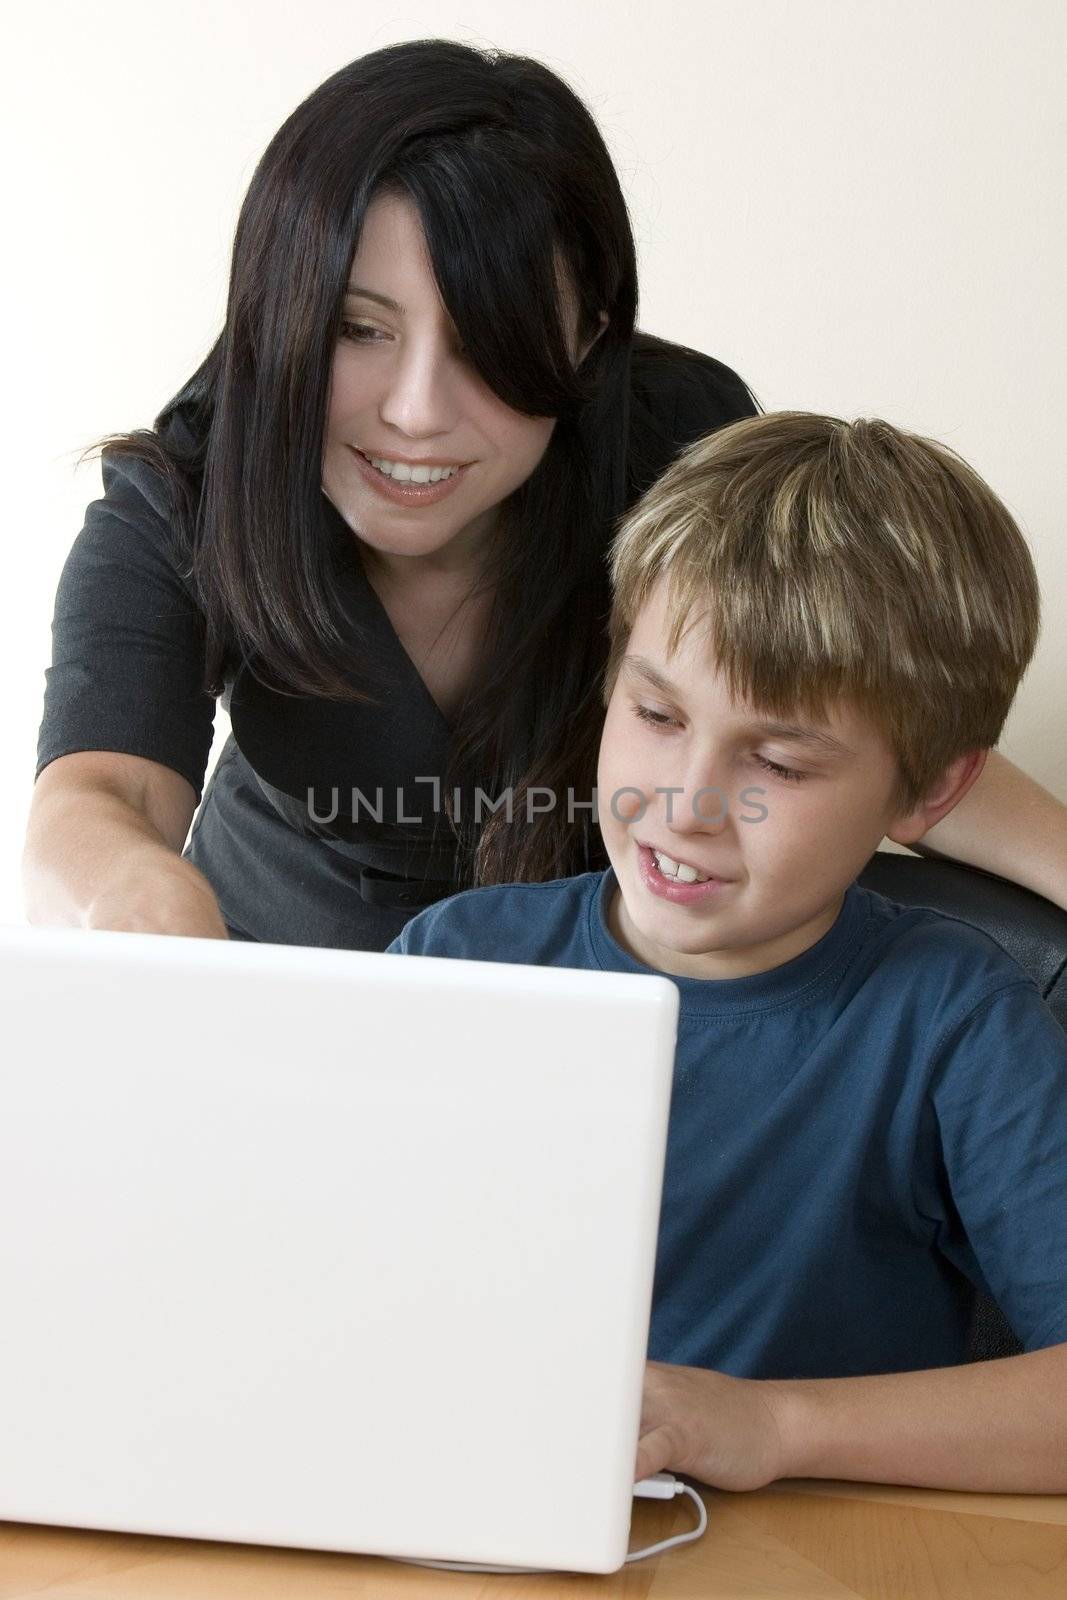 Adult woman and child at computer by lovleah